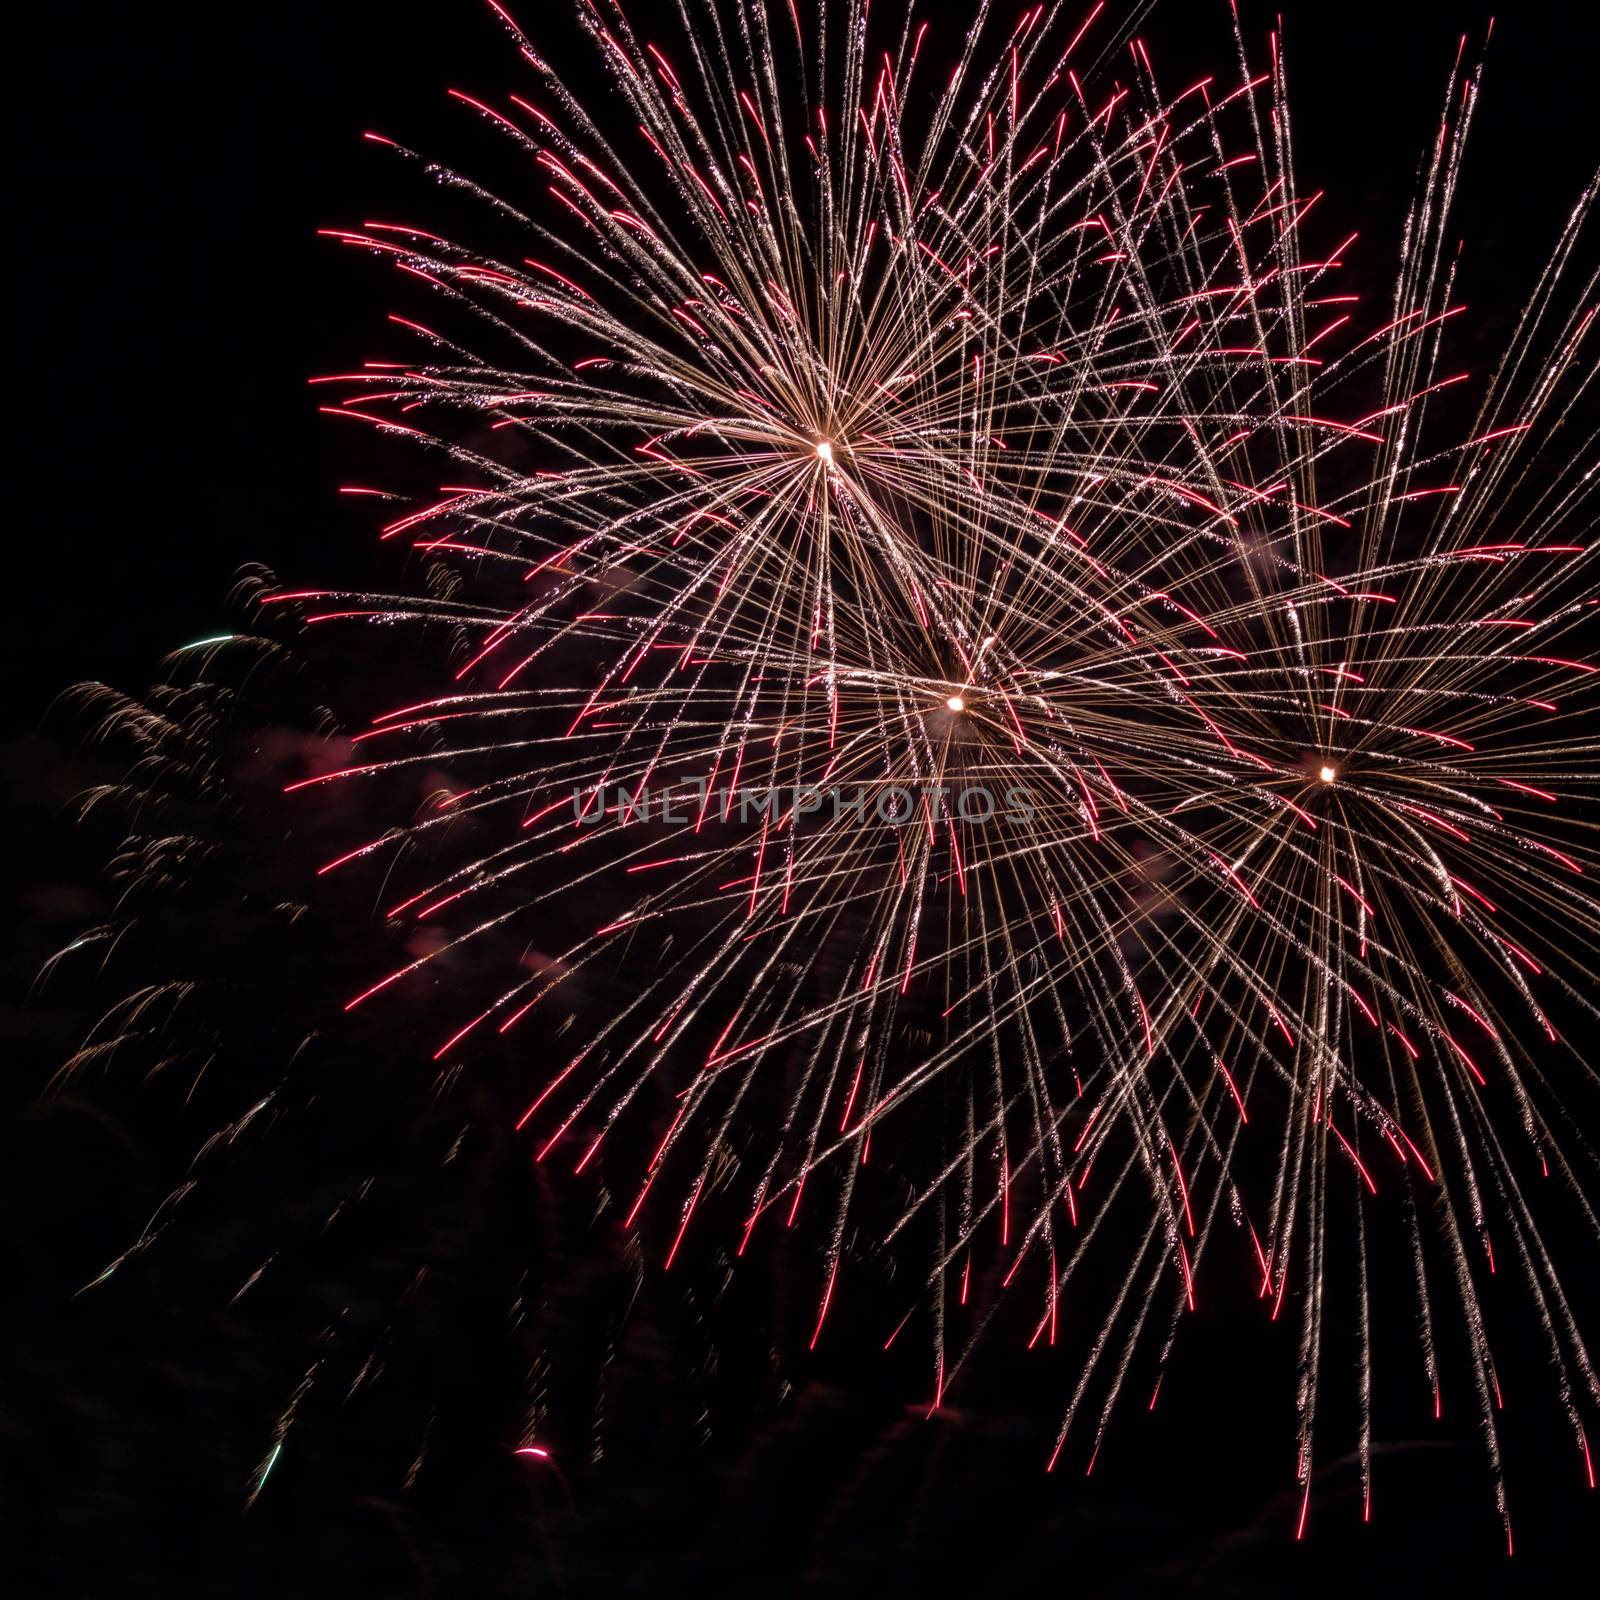 Fireworks light up the sky with dazzling display in Palamos, tow by Digoarpi